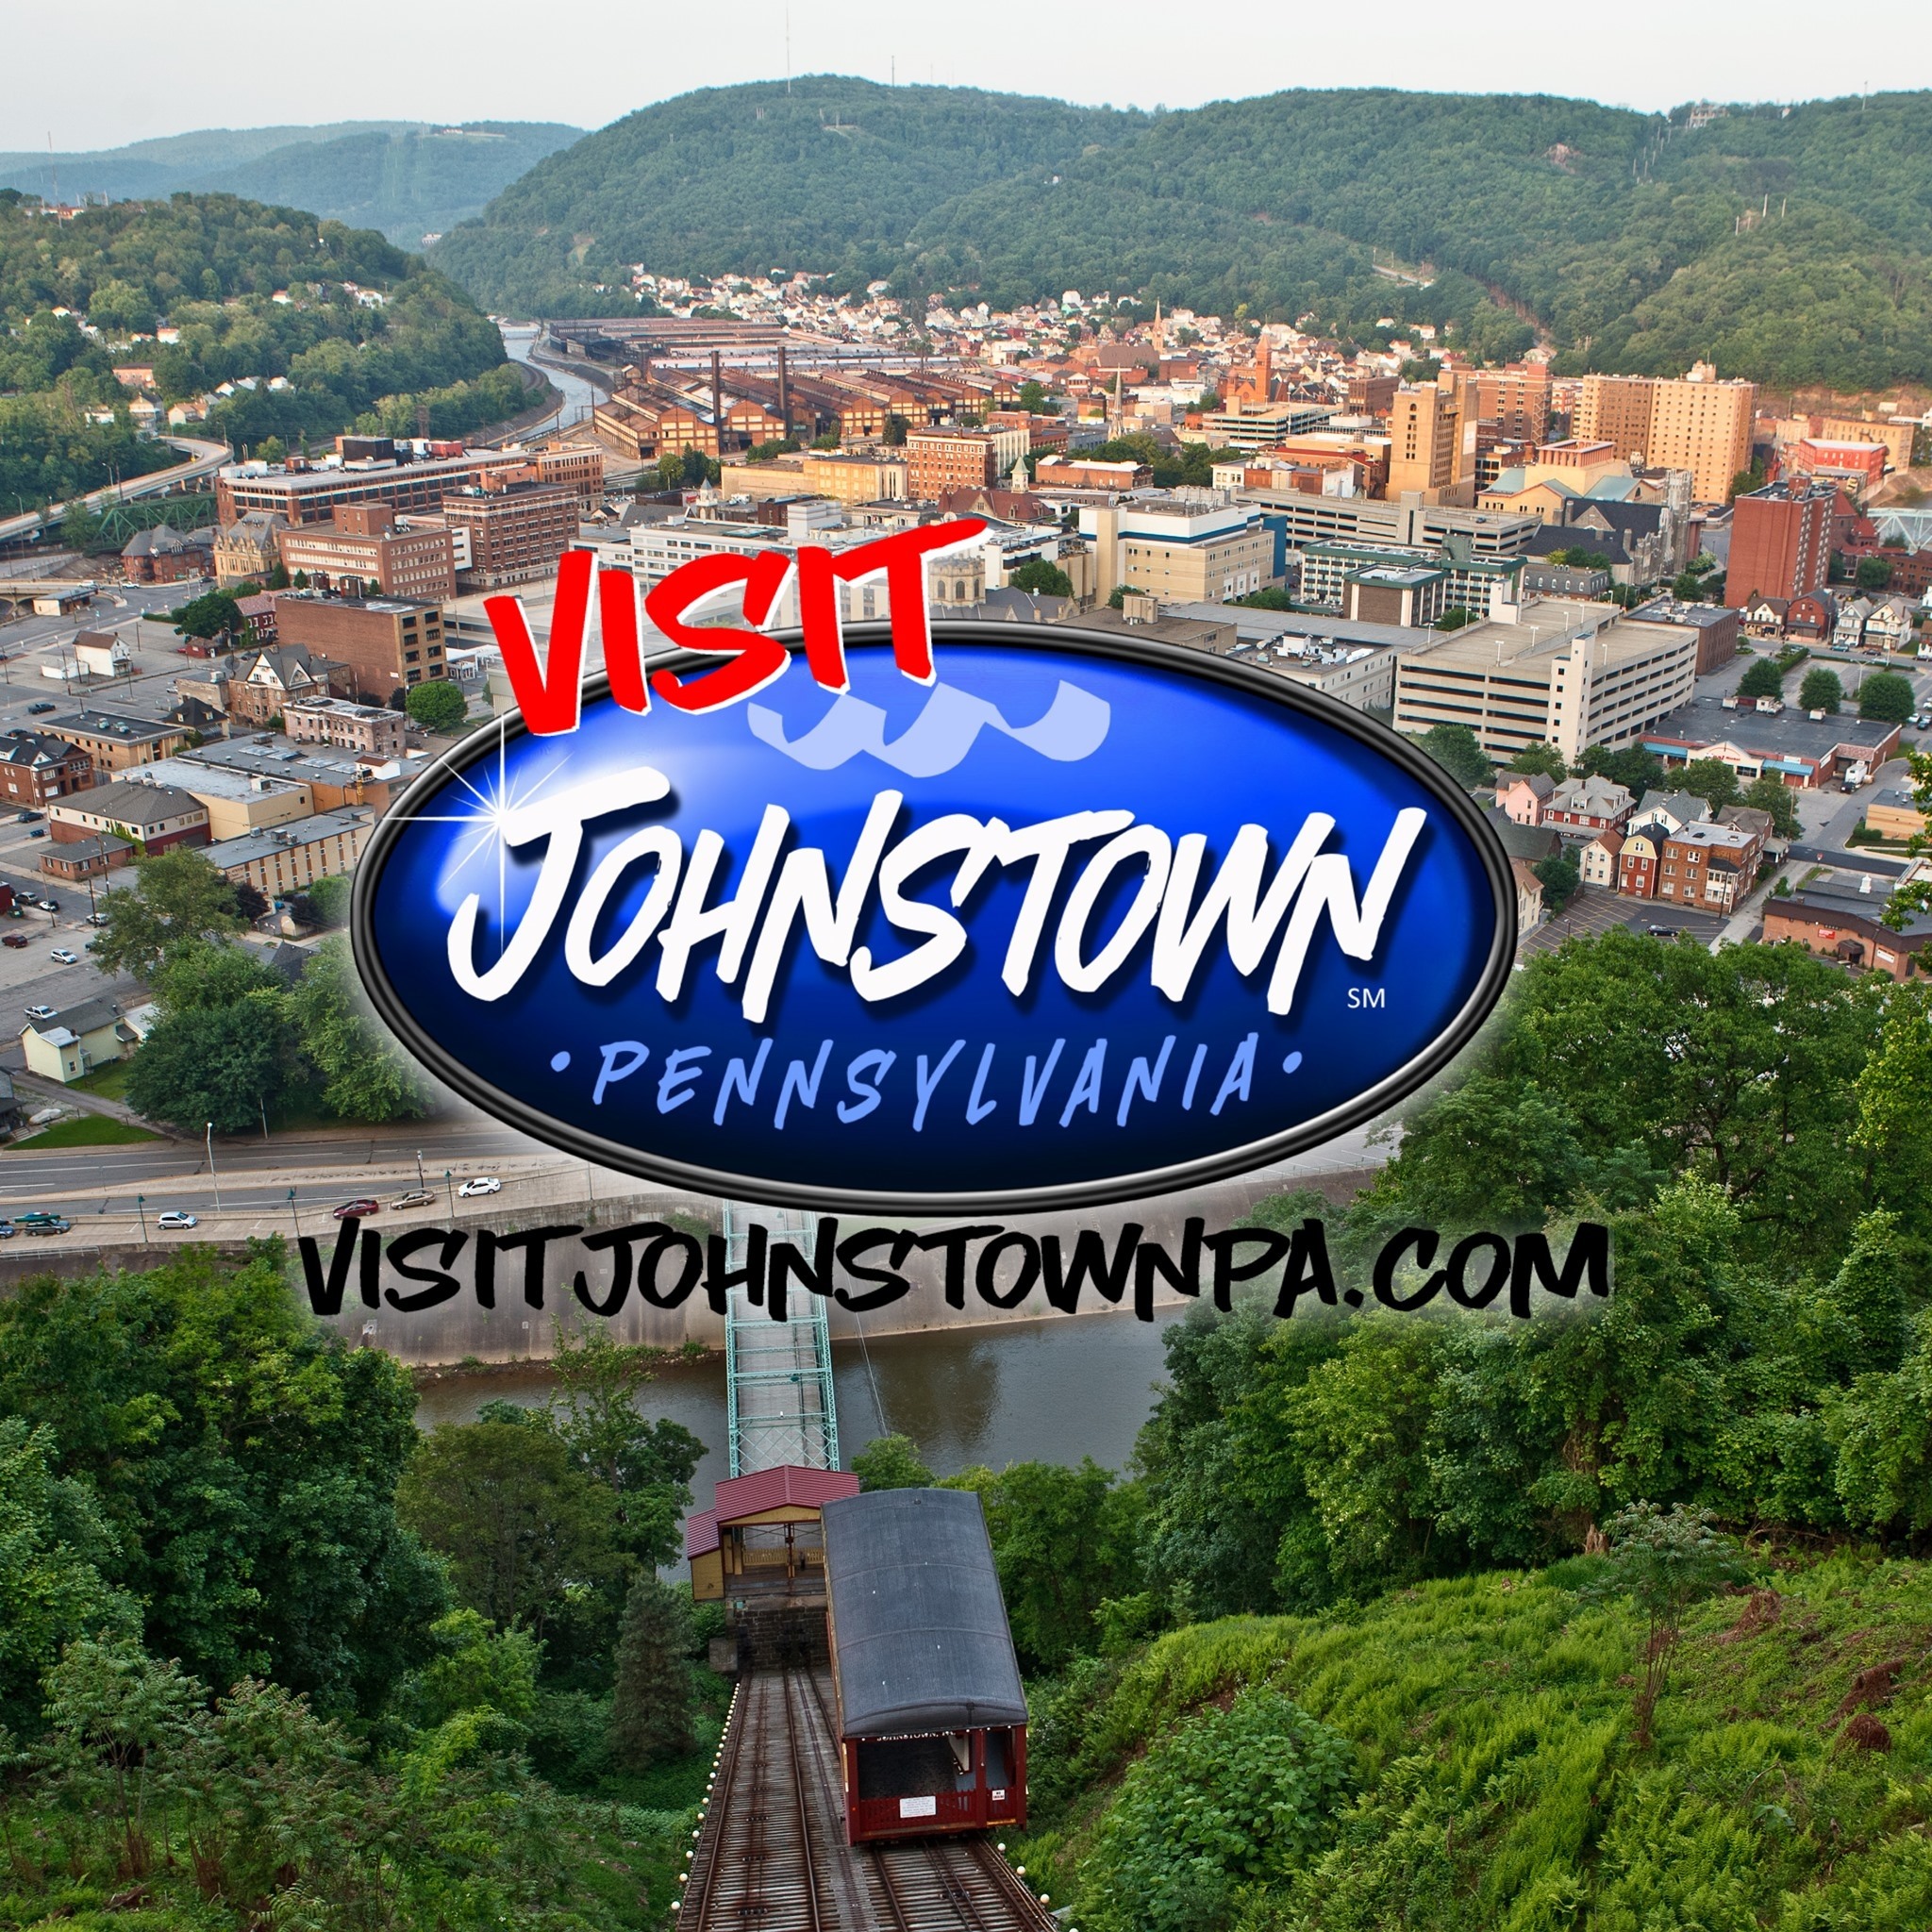 Ariel shot of Johnstown, Pennsylvania with the Visit Johnstown logo.